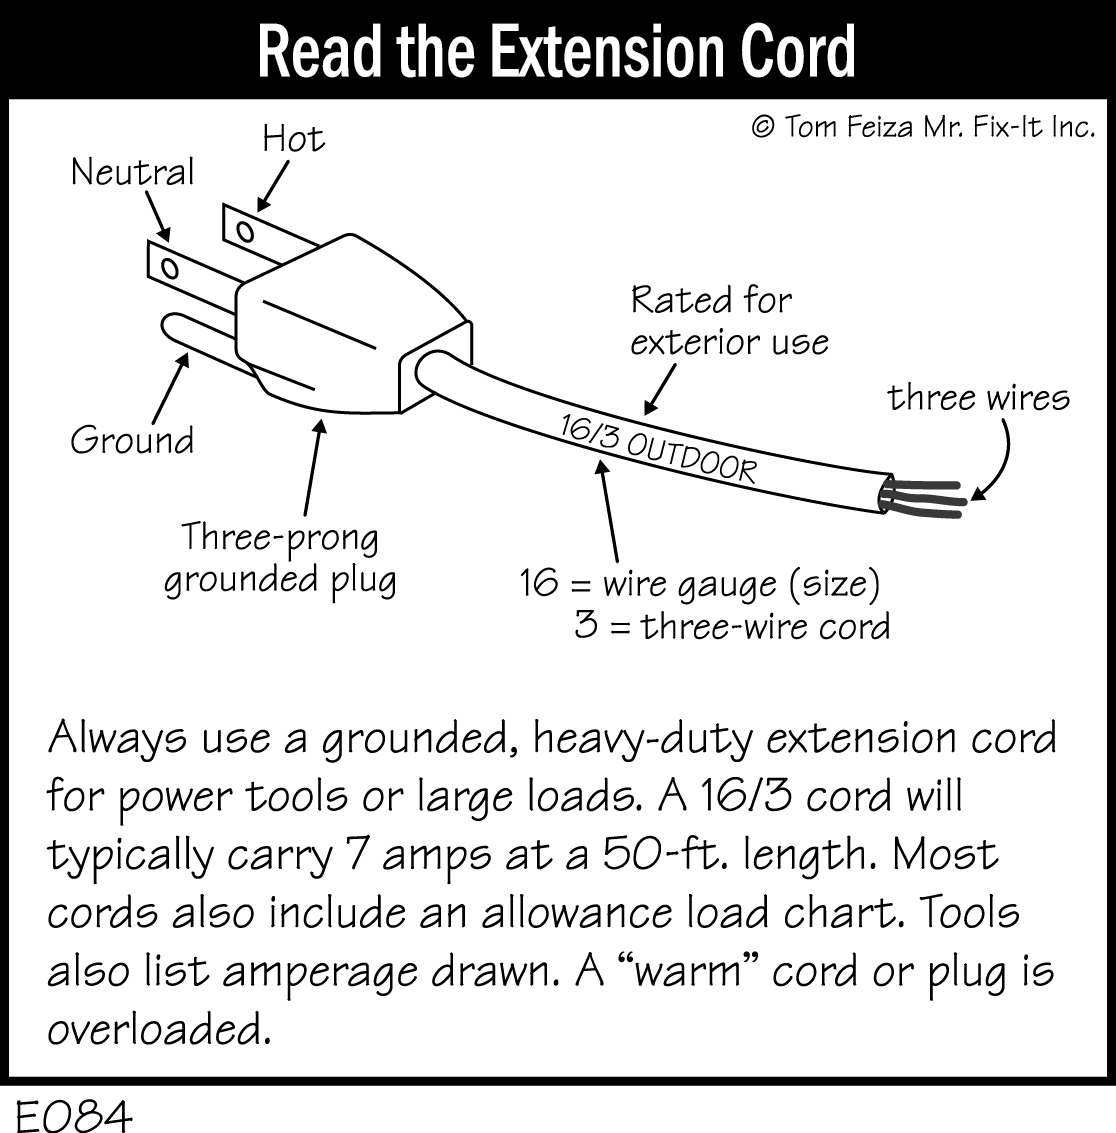 E084 - Read the Extension Cord - Covered Bridge Professional Home  Inspections  3 Prong Extension Cord Wiring Diagram    Covered Bridge Home Inspections